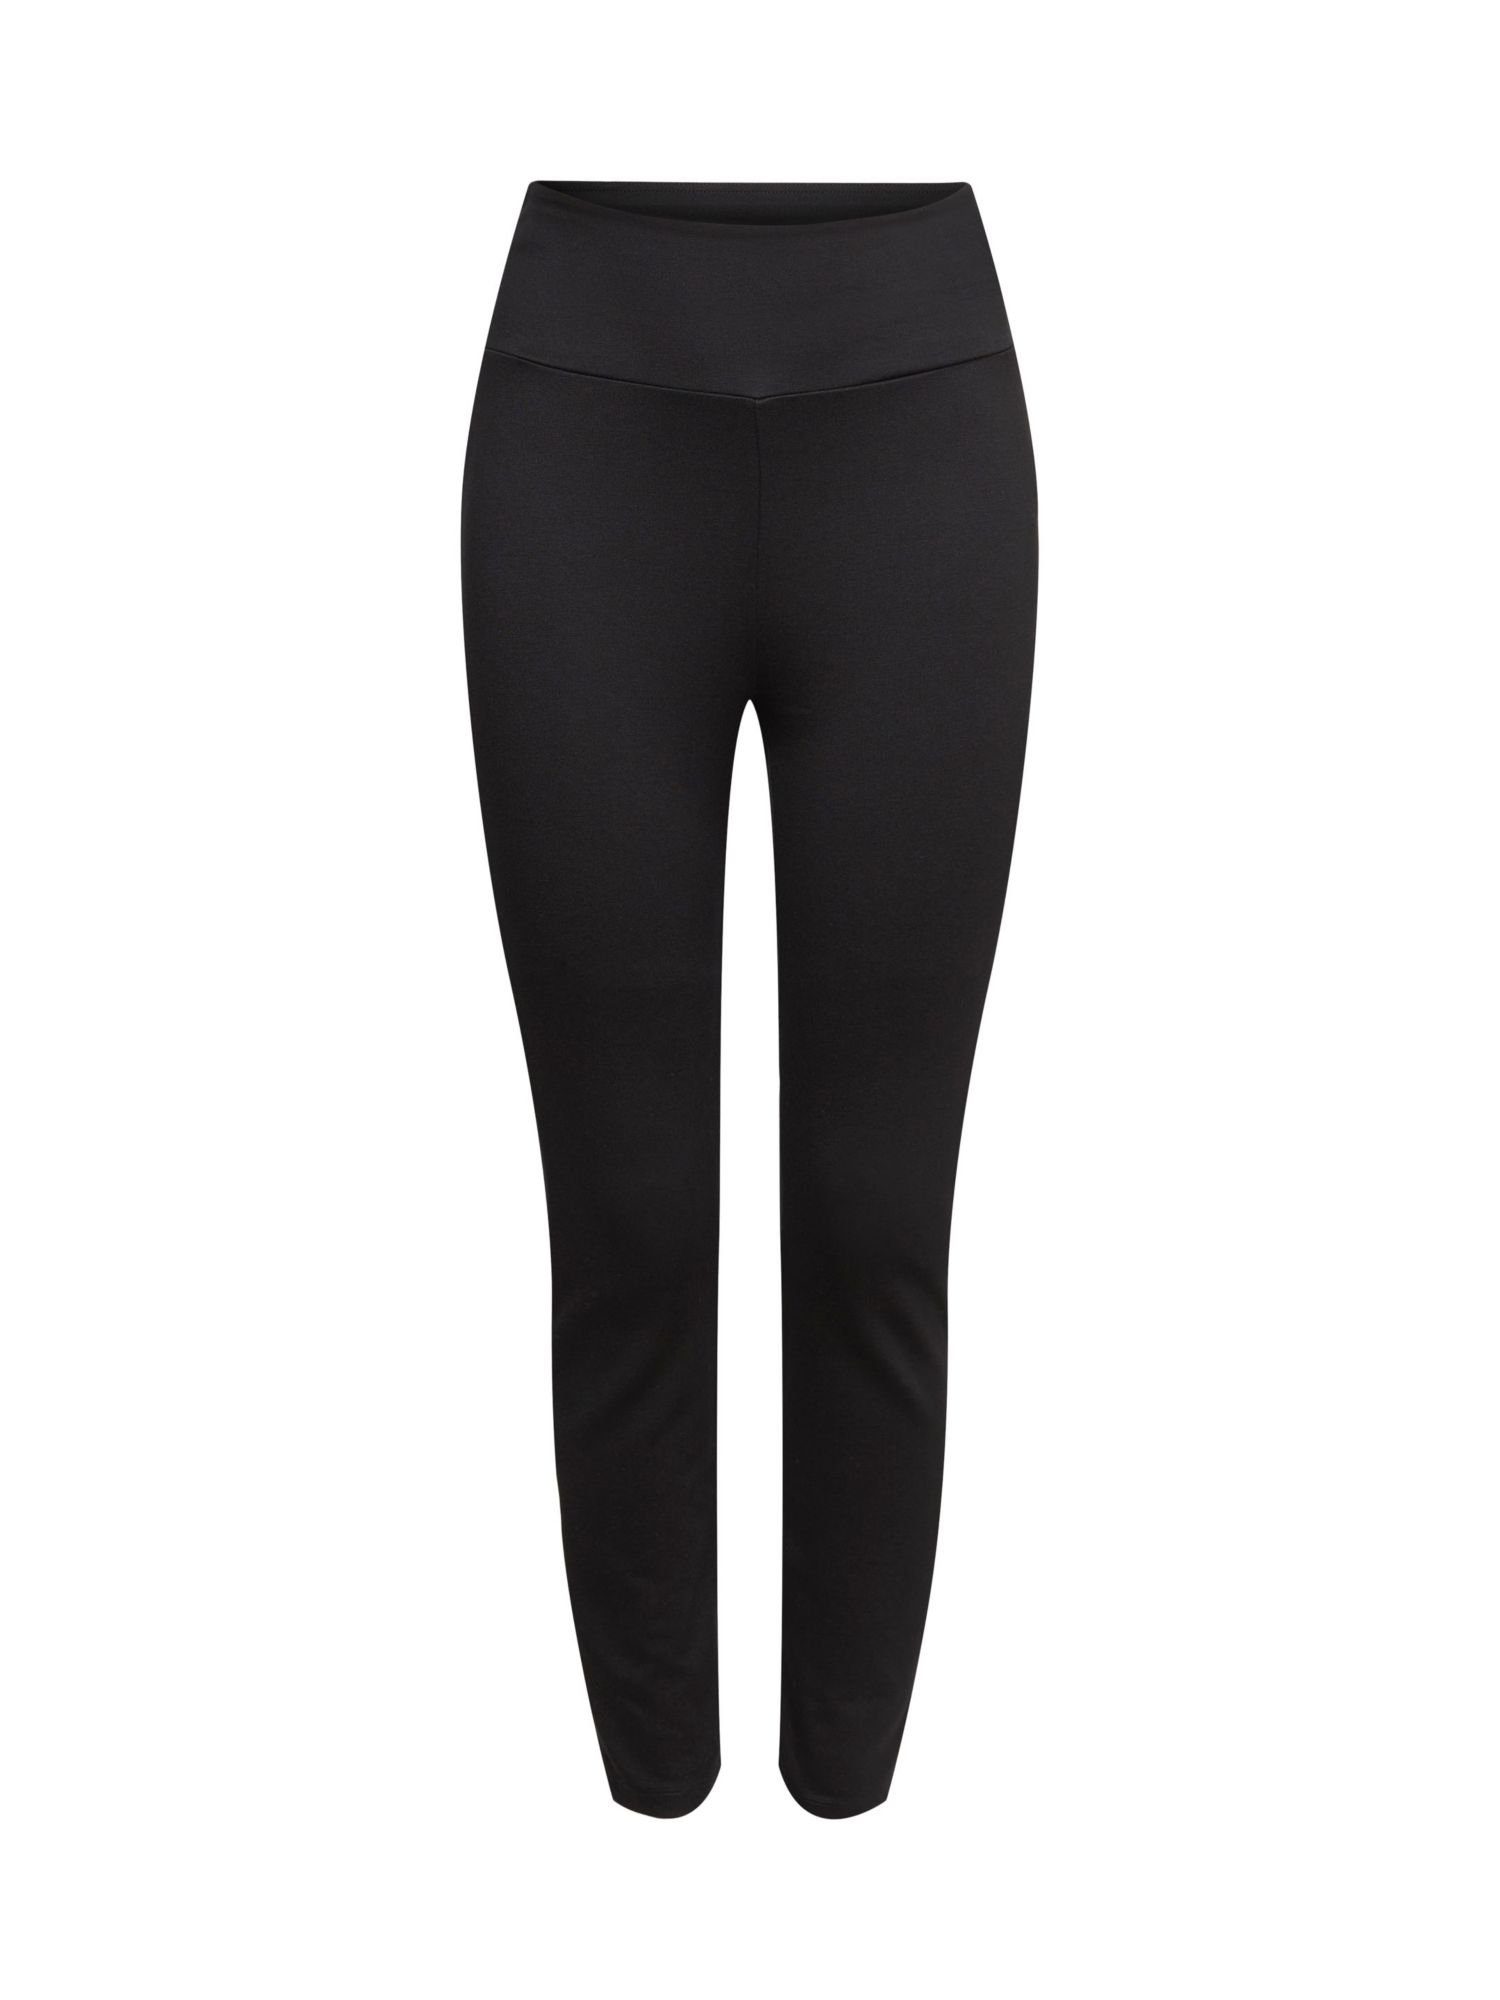 Esprit Collection Stretch-Hose Leggings mit hoher Taille